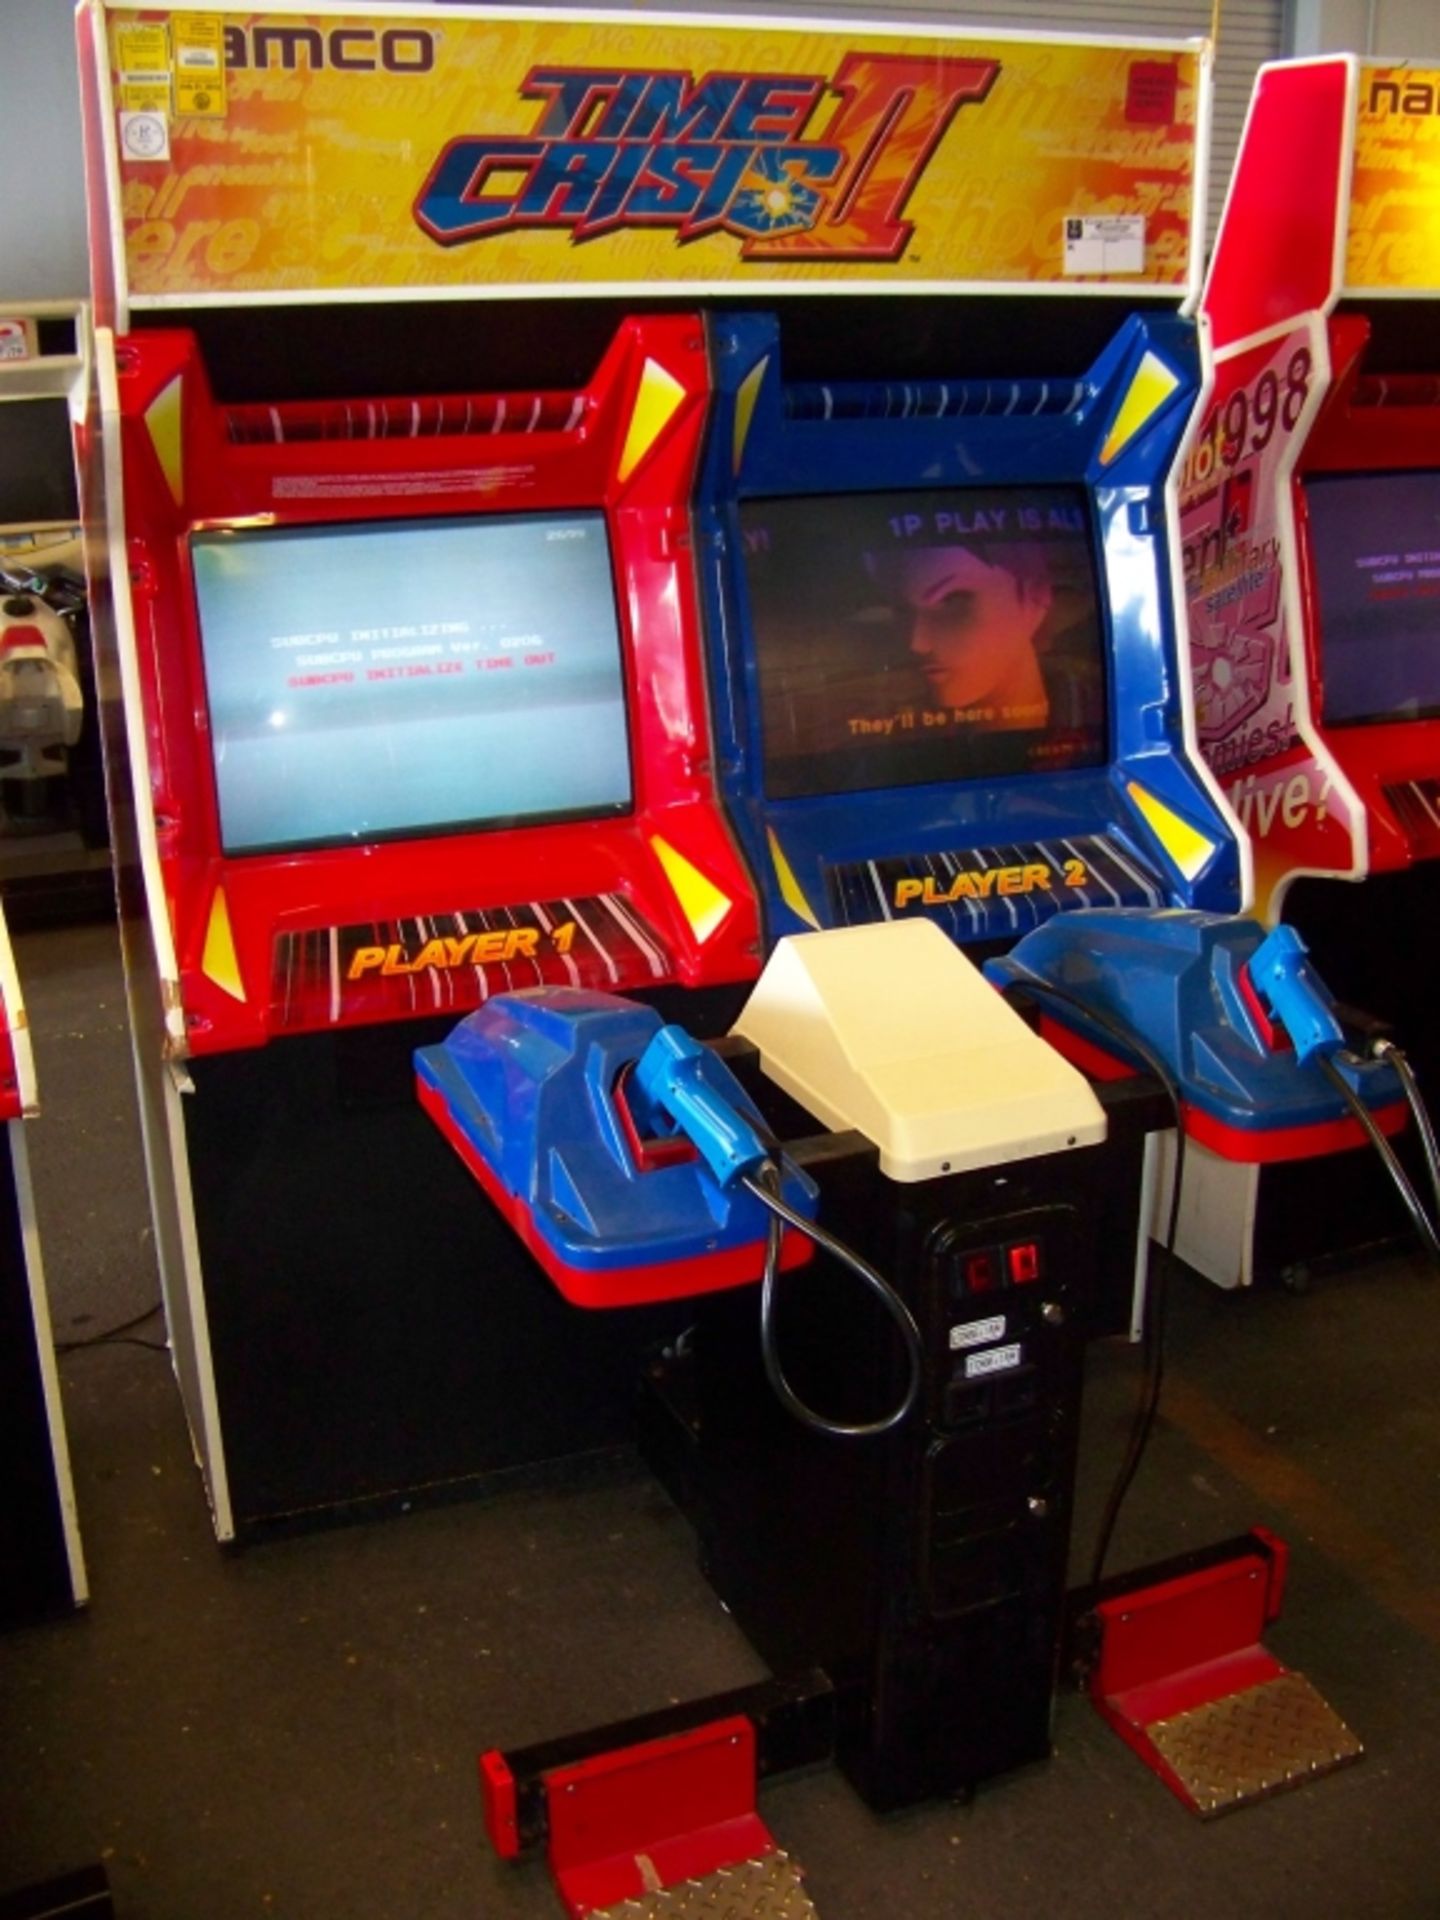 TIME CRISIS II DUAL SHOOTER ARCADE GAME NAMCO Item is in used condition. Evidence of wear and